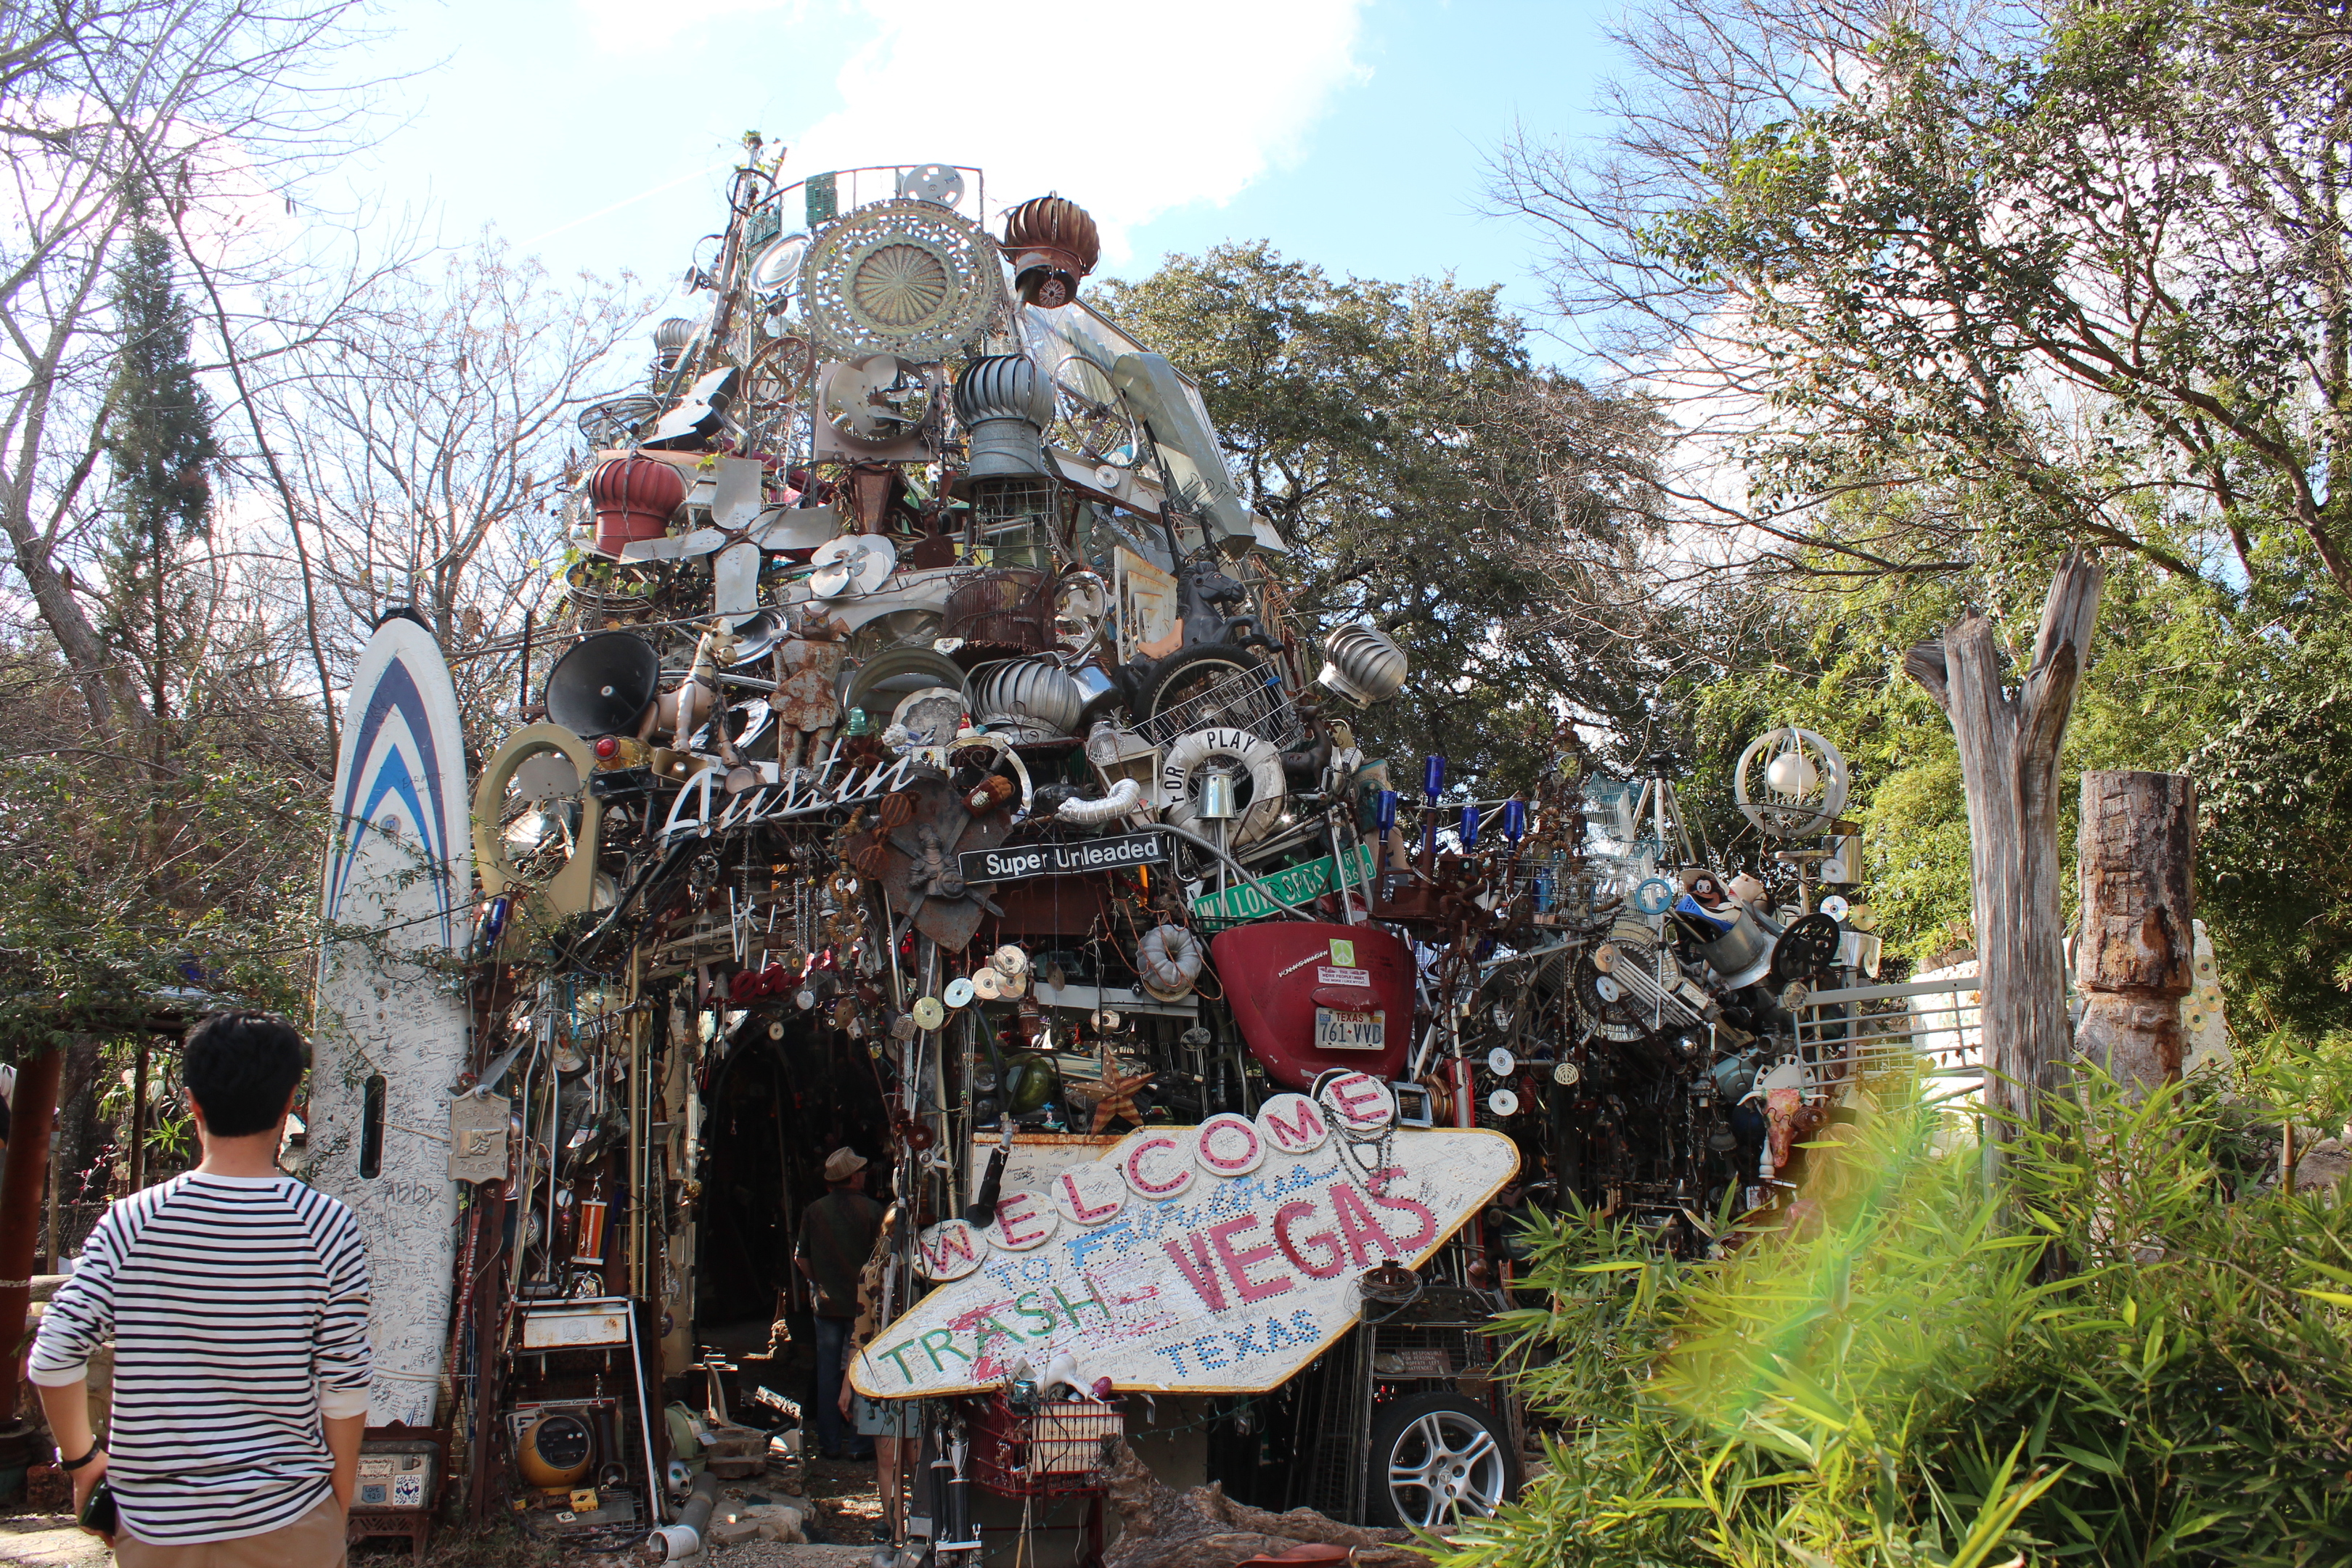 Cathedral of junk